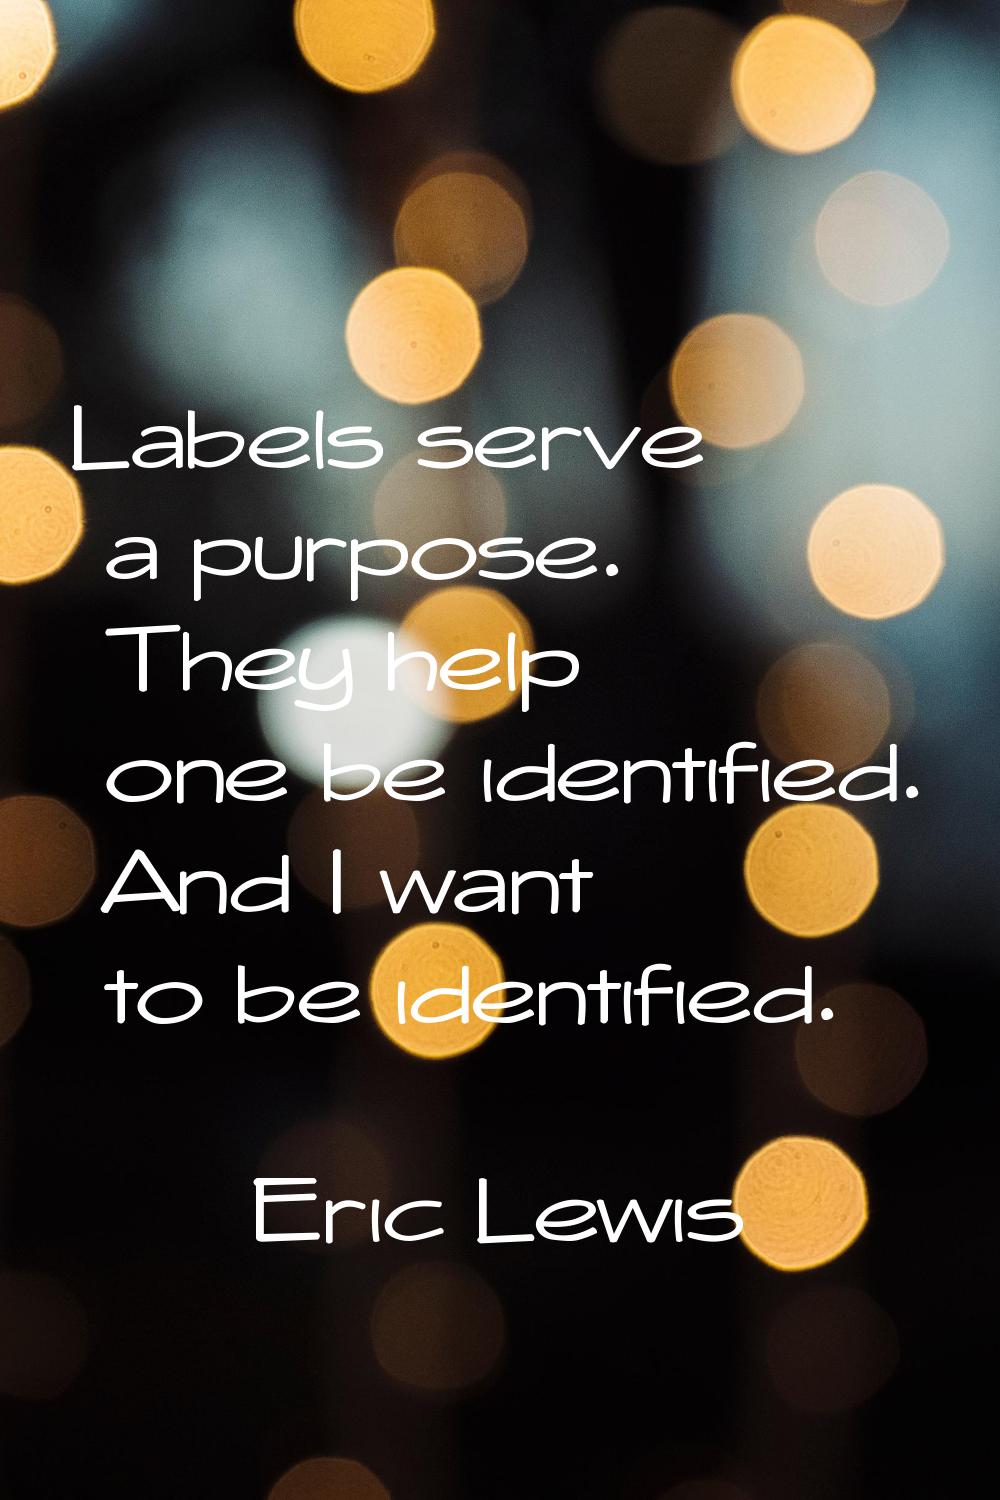 Labels serve a purpose. They help one be identified. And I want to be identified.